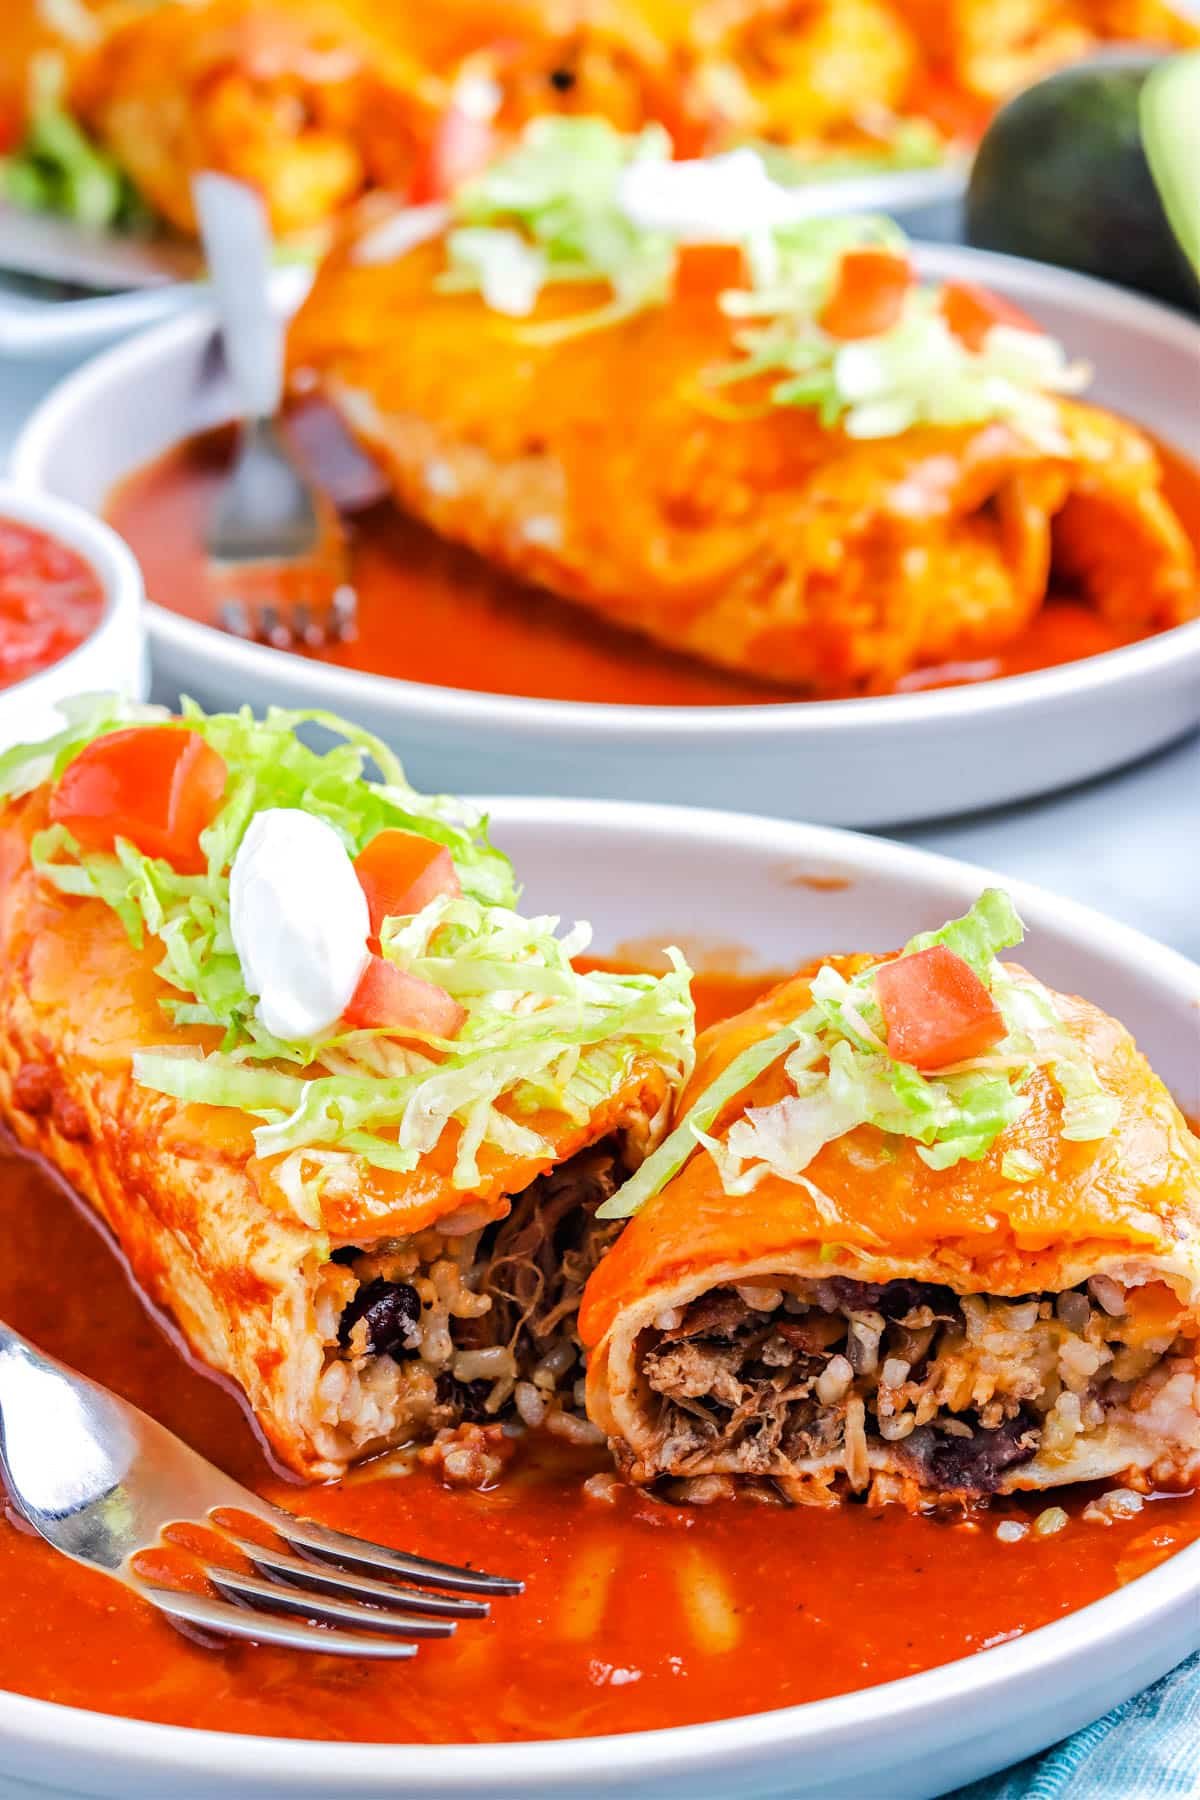 A Wet Burrito cut open so you can see the interior of the burrito.